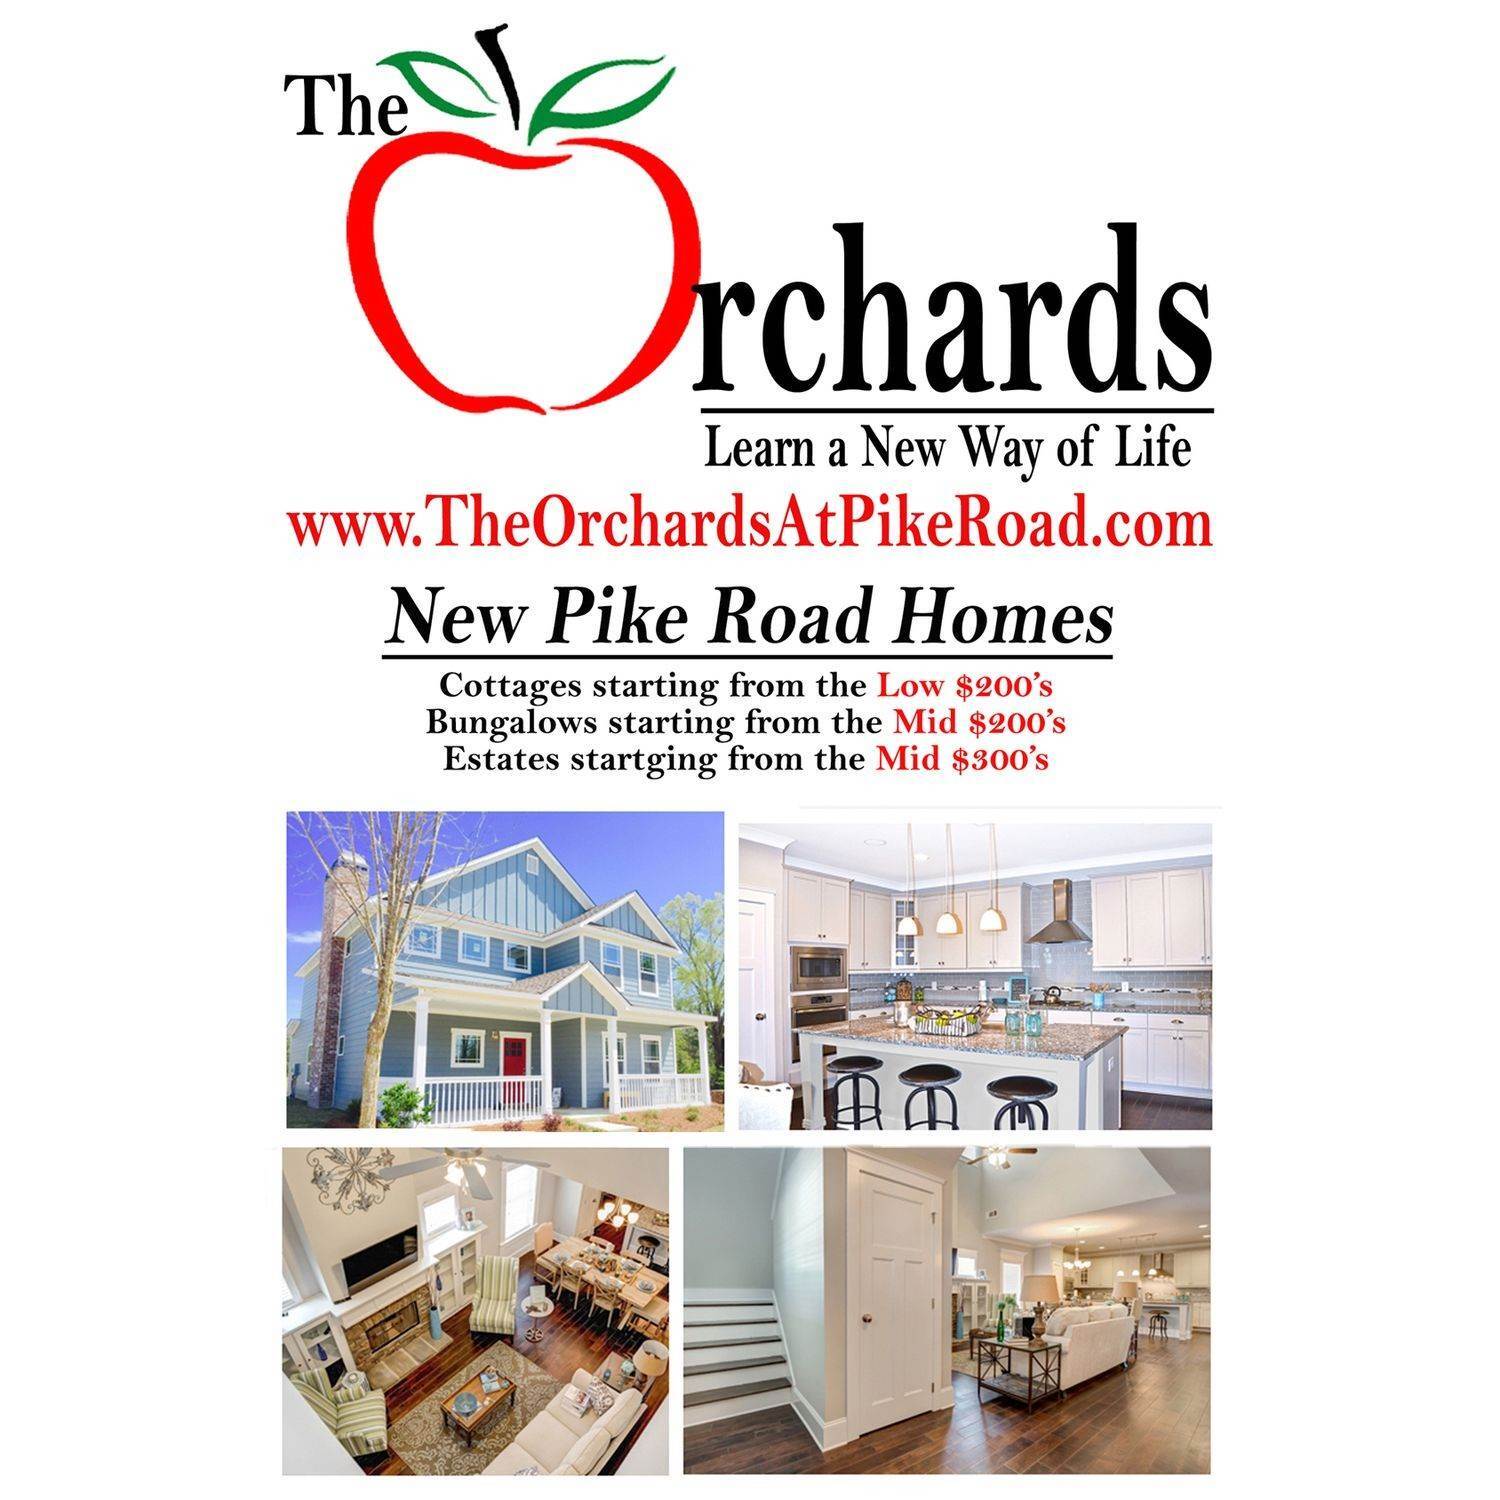 The Orchards at Pike Road bâtiment à 130 Avenue Of Learning, Pike Road, AL 36064